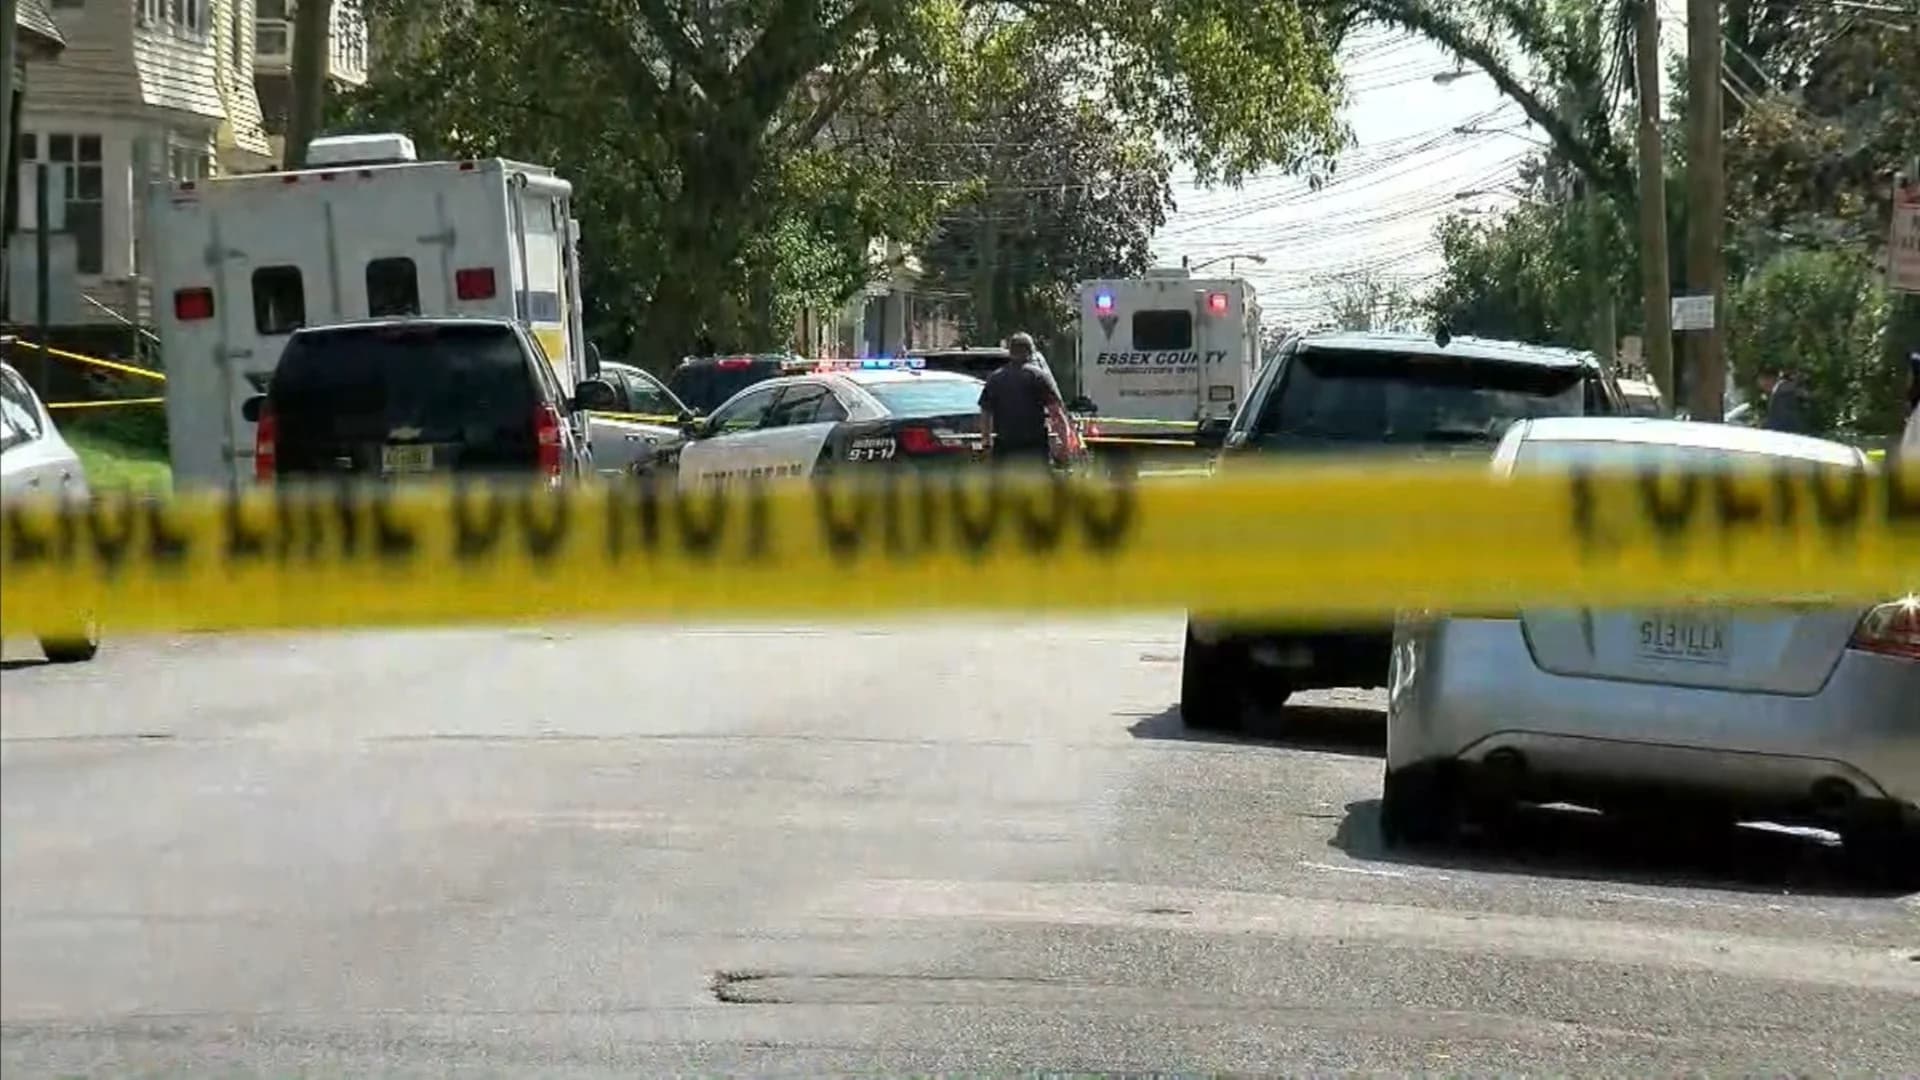 Authorities identify man killed in police shootout that left 3 officers injured